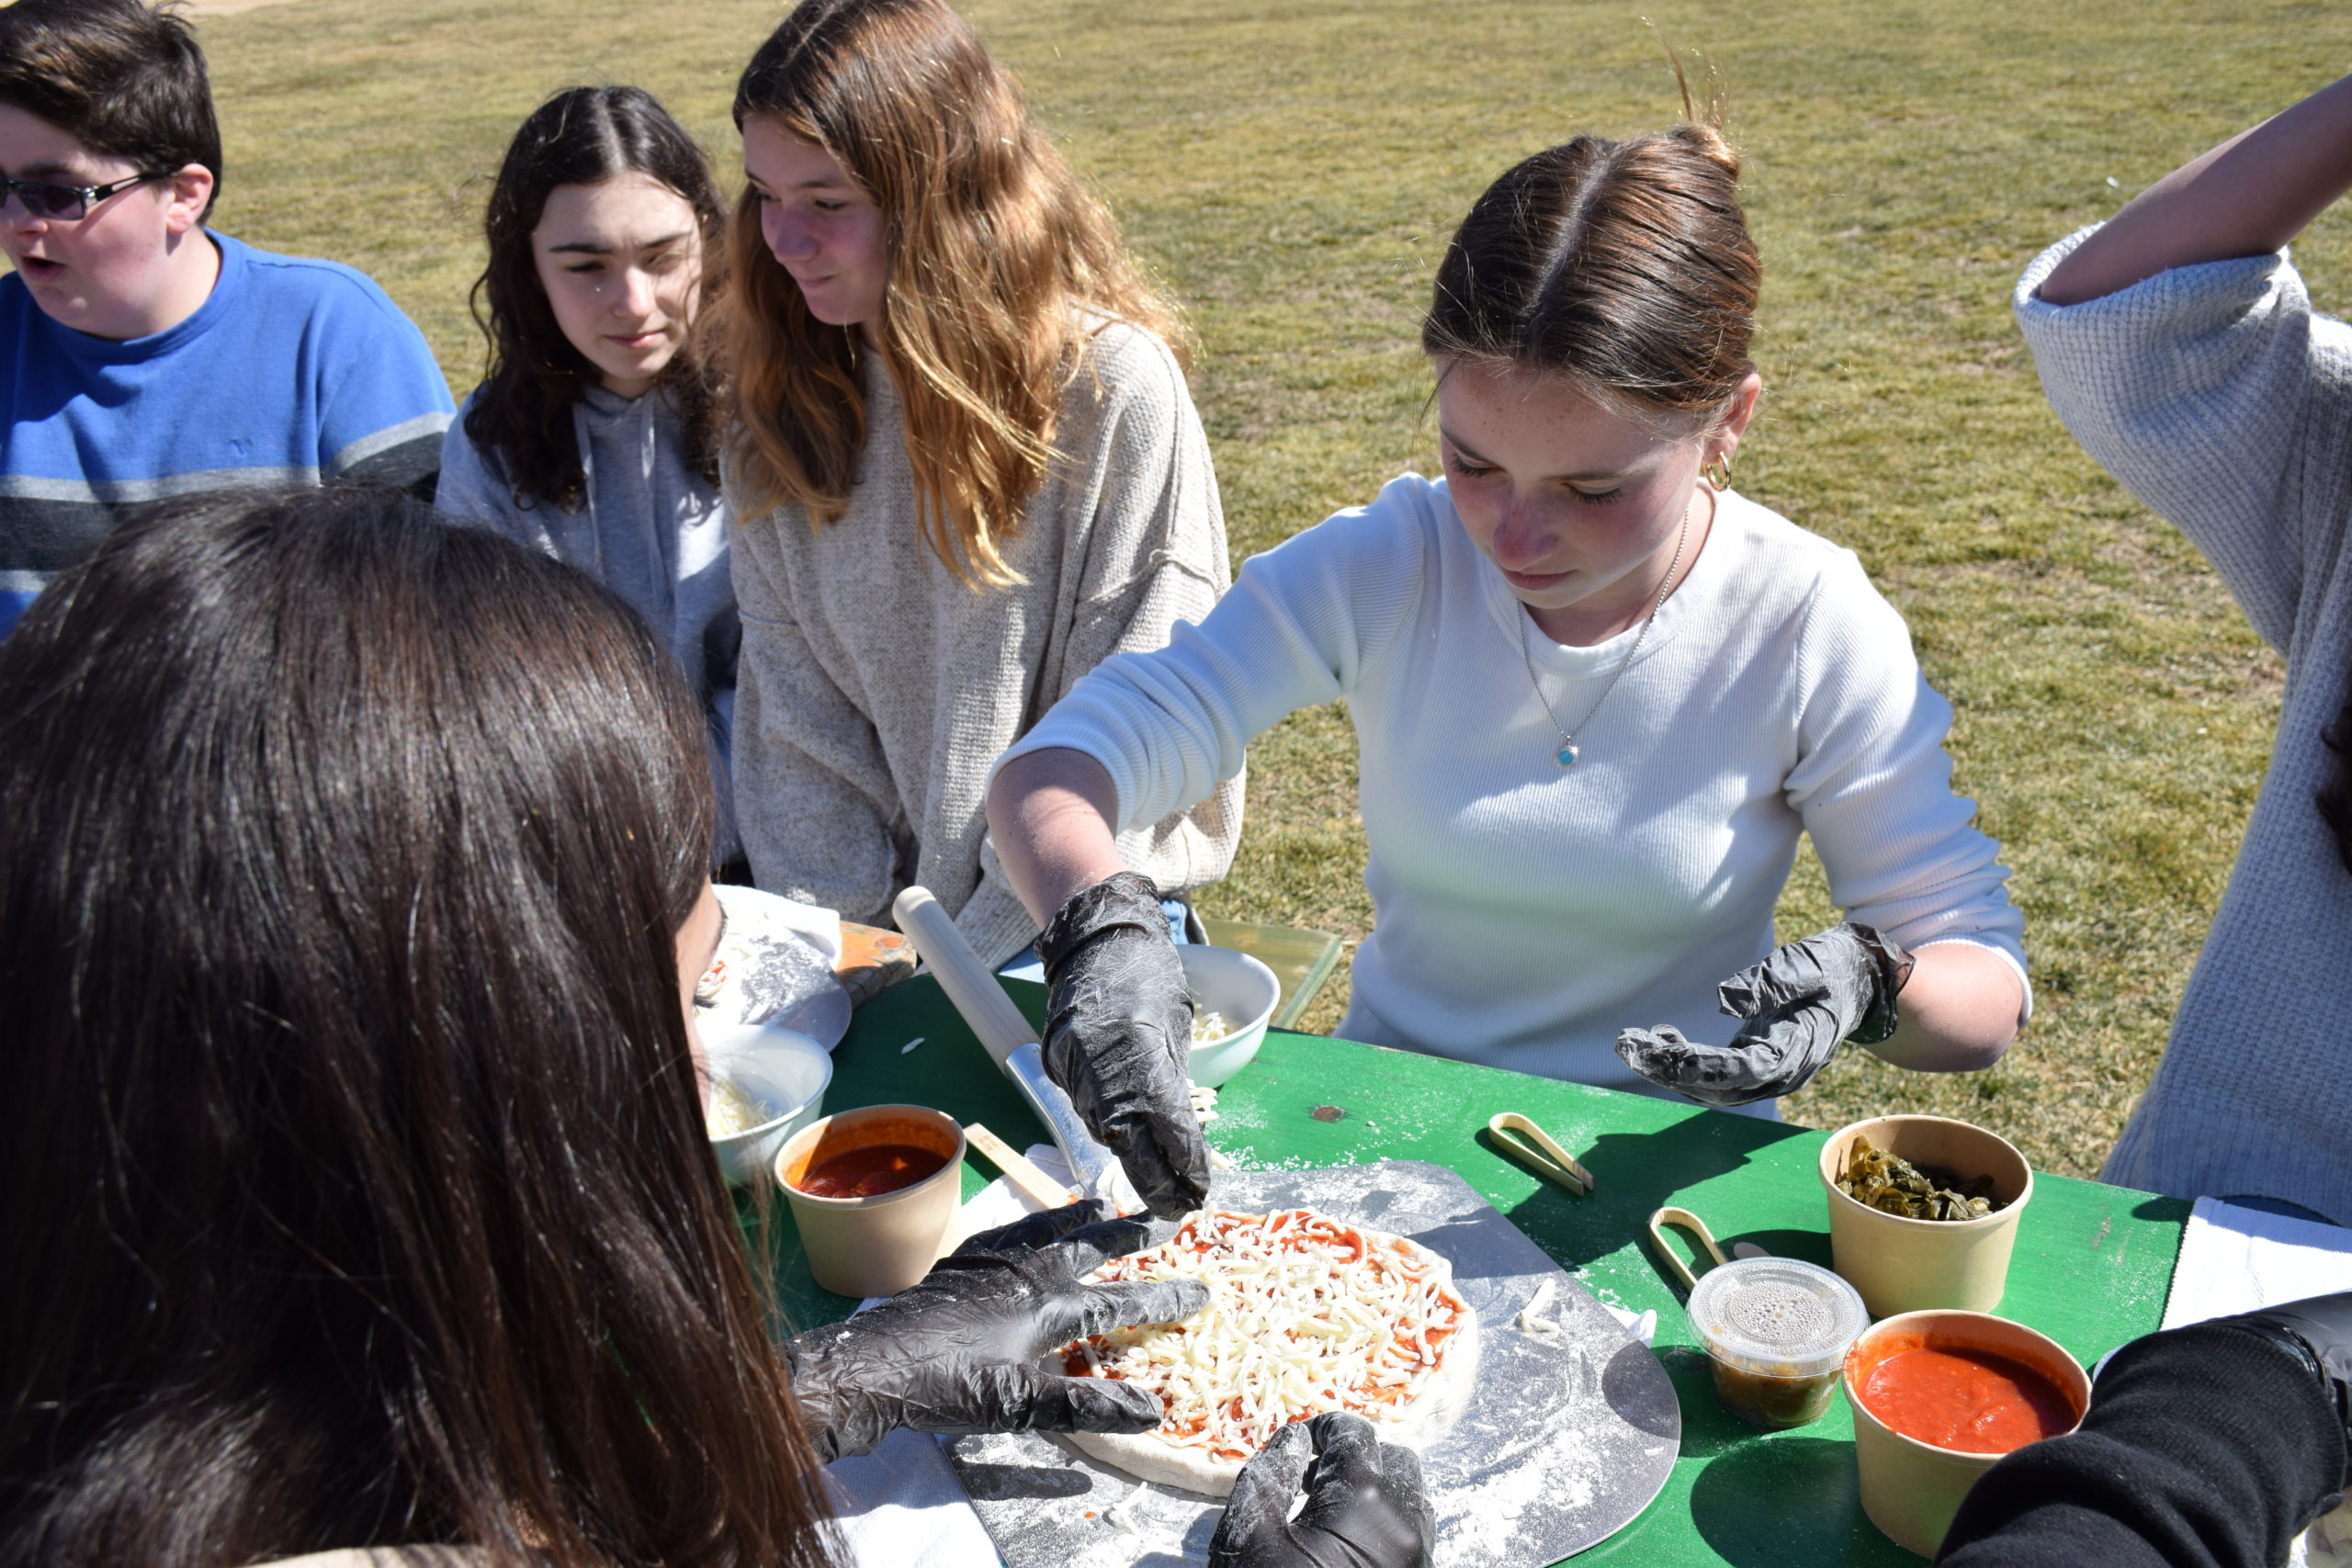 Westhampton Beach Middle School students created delicious artisanal pizzas through a program with Hamptons Aristocrat and Early Girl Farm.